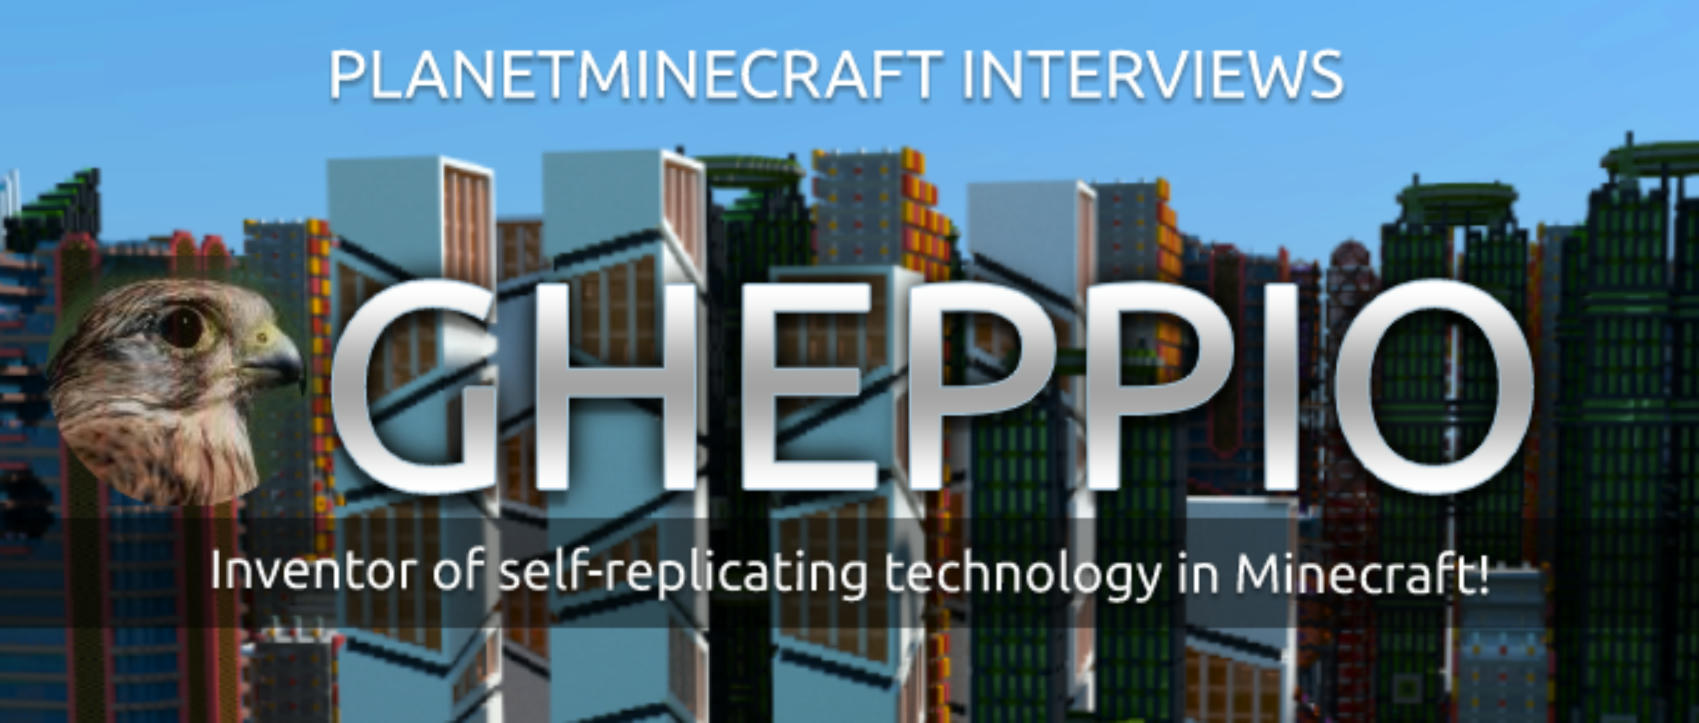 Infinity City - Planetary Terraforming Project with Self-Replicating Technology Minecraft Map